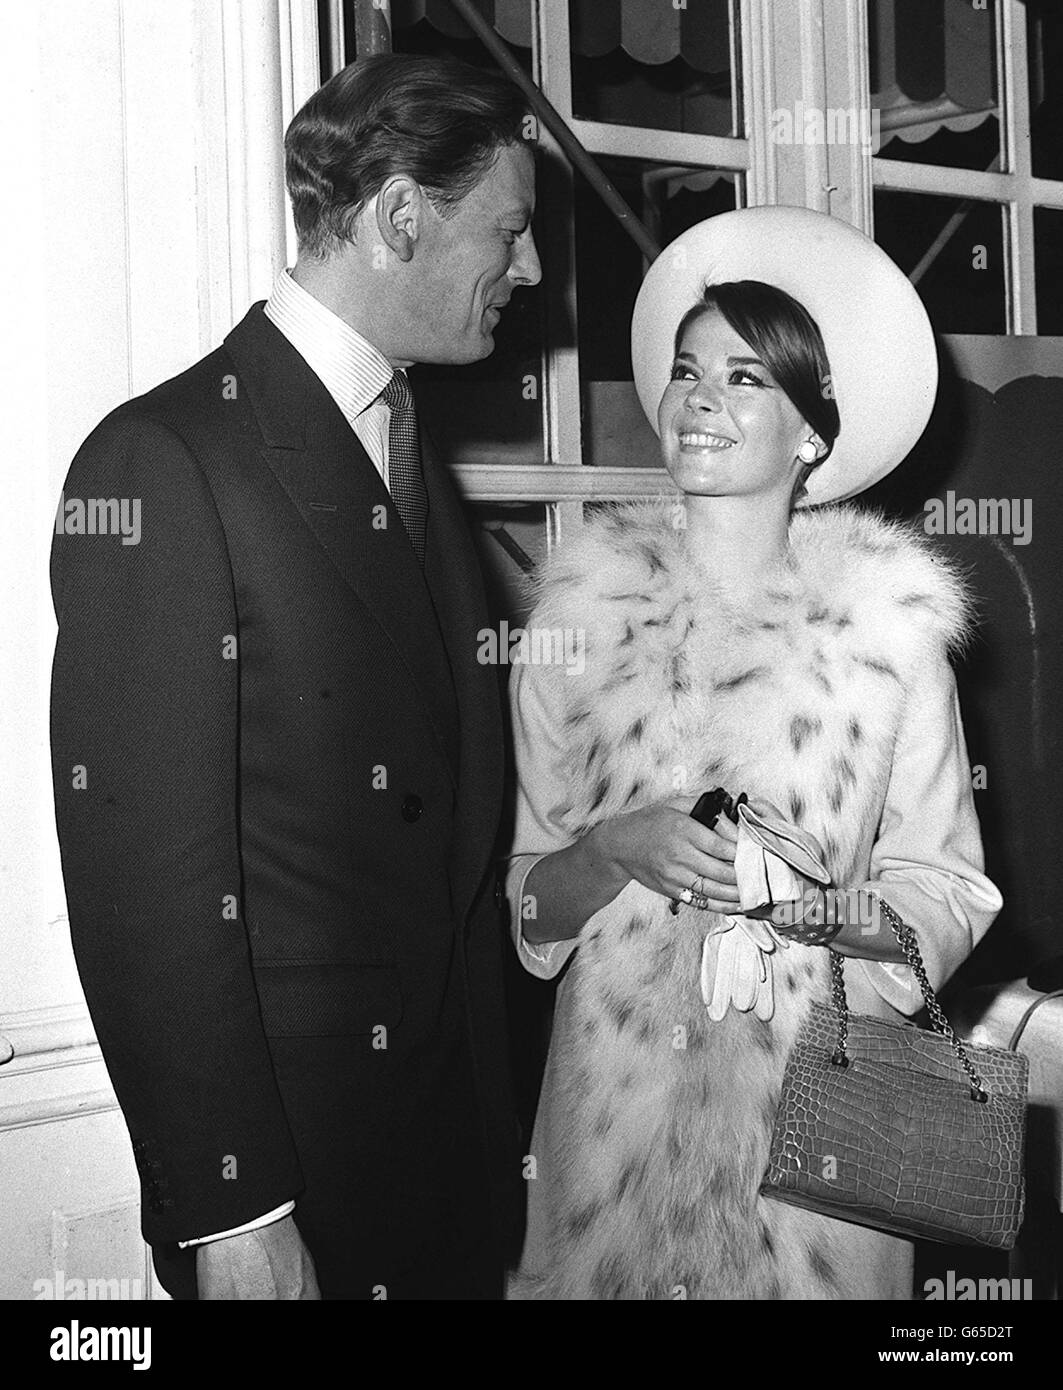 The Hon. Angus Ogilvy, husband of Princess Alexandra, talking with Hollywood actress Natalie Wood at the Savoy Hotel, London, where they were at a luncheon given by the Variety Club of Great Britain. 26/12/04: Sir Angus Ogilvy died. Stock Photo